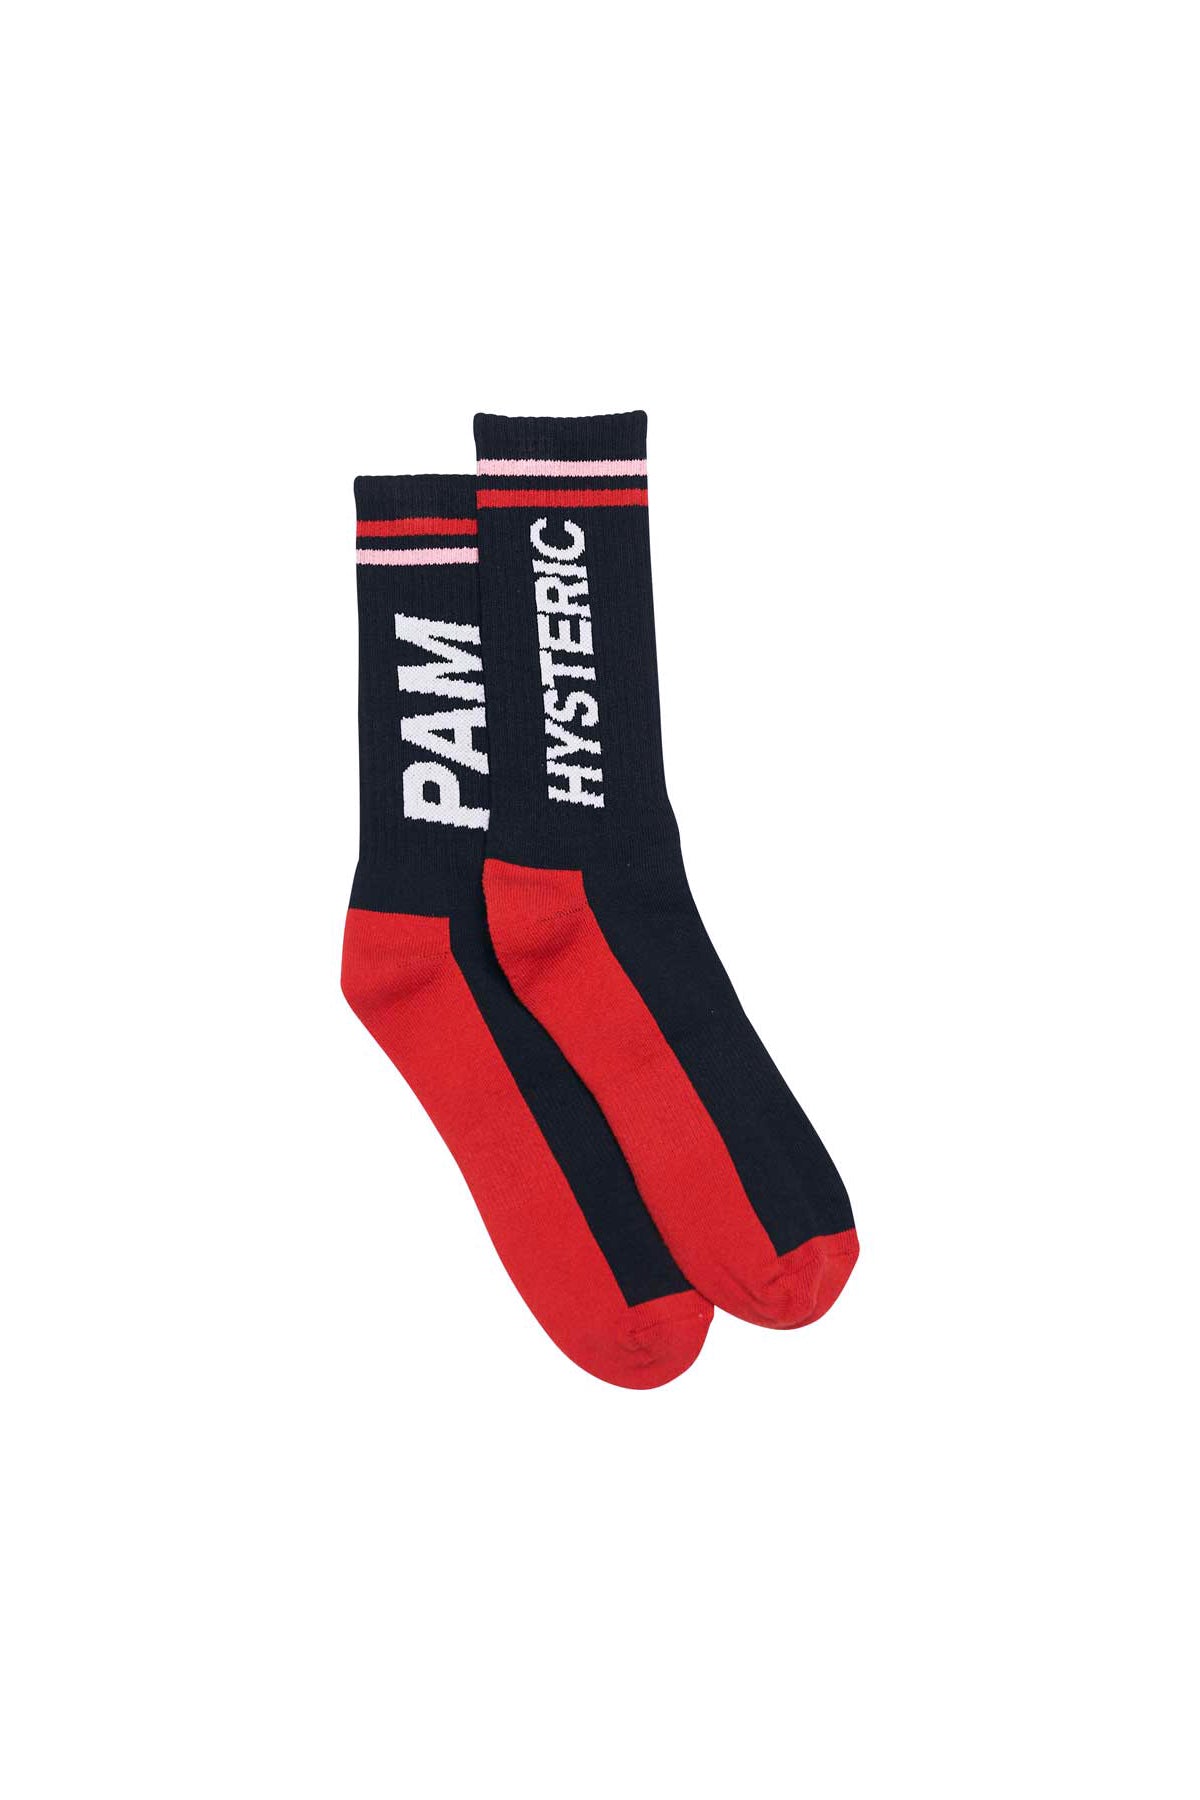 The PAM X HYSTERIC GLAMOUR - LOGO SPORT SOCKS  available online with global shipping, and in PAM Stores Melbourne and Sydney.